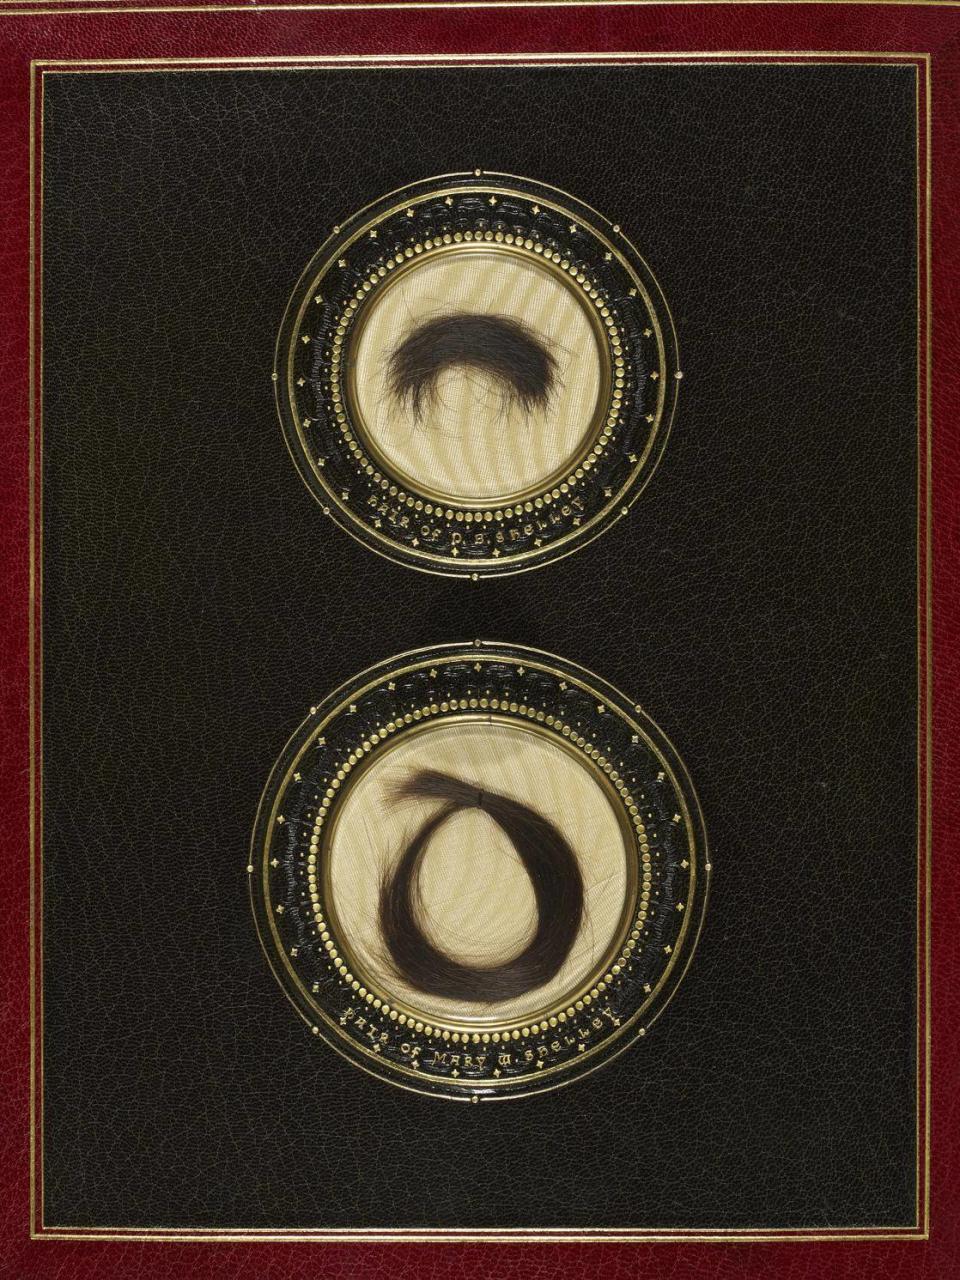 Locks of hair from 19th-century poet Percy Bysshe Shelley and his wife and author of Frankenstein, Mary Shelley (British Library)